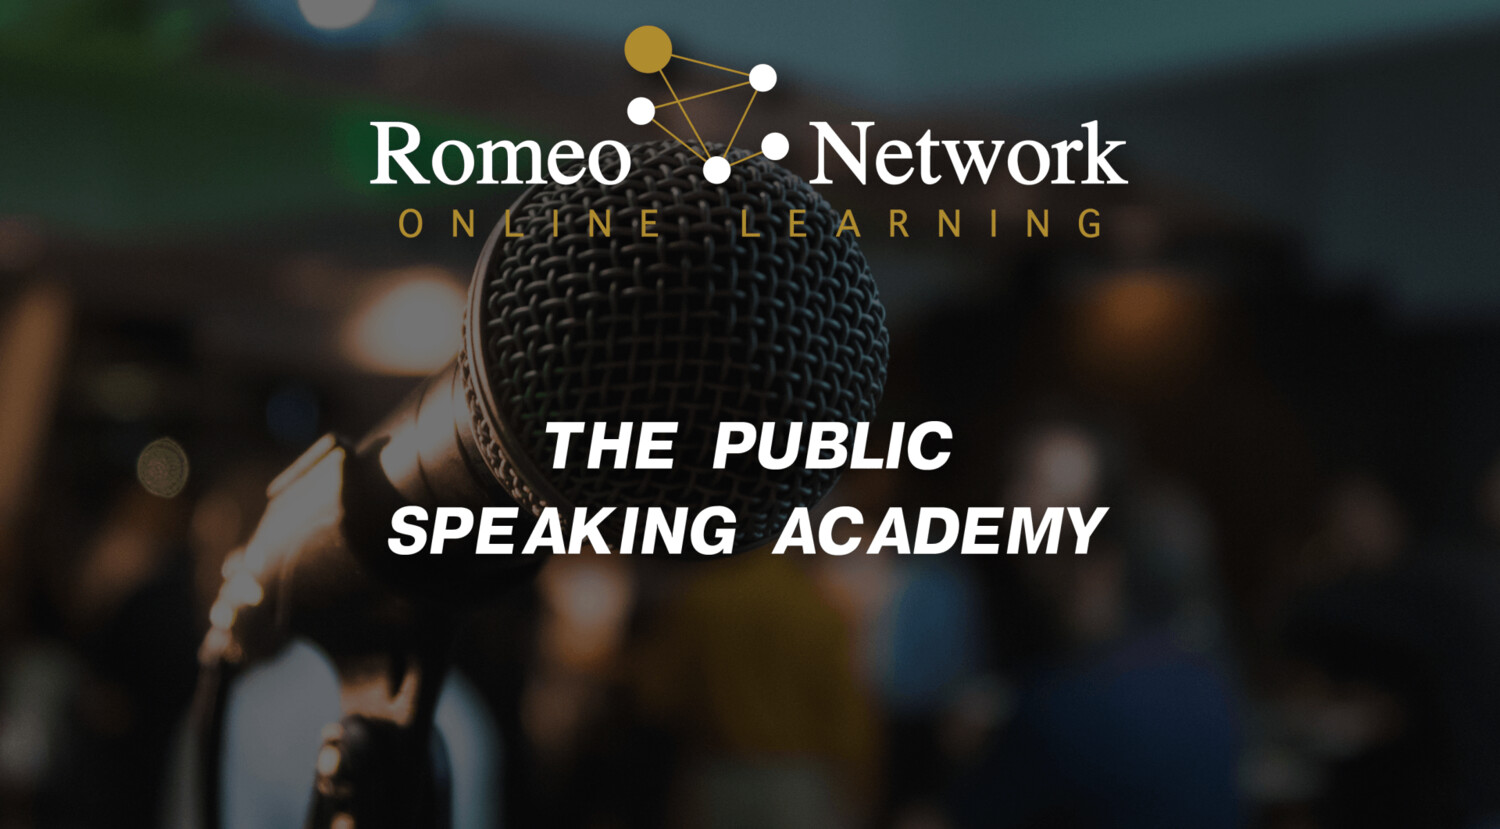 Public Speaking Academy (4-Part Series on 9/09, 9/16, 9/23, and 9/30) Presented by Diane Dayton